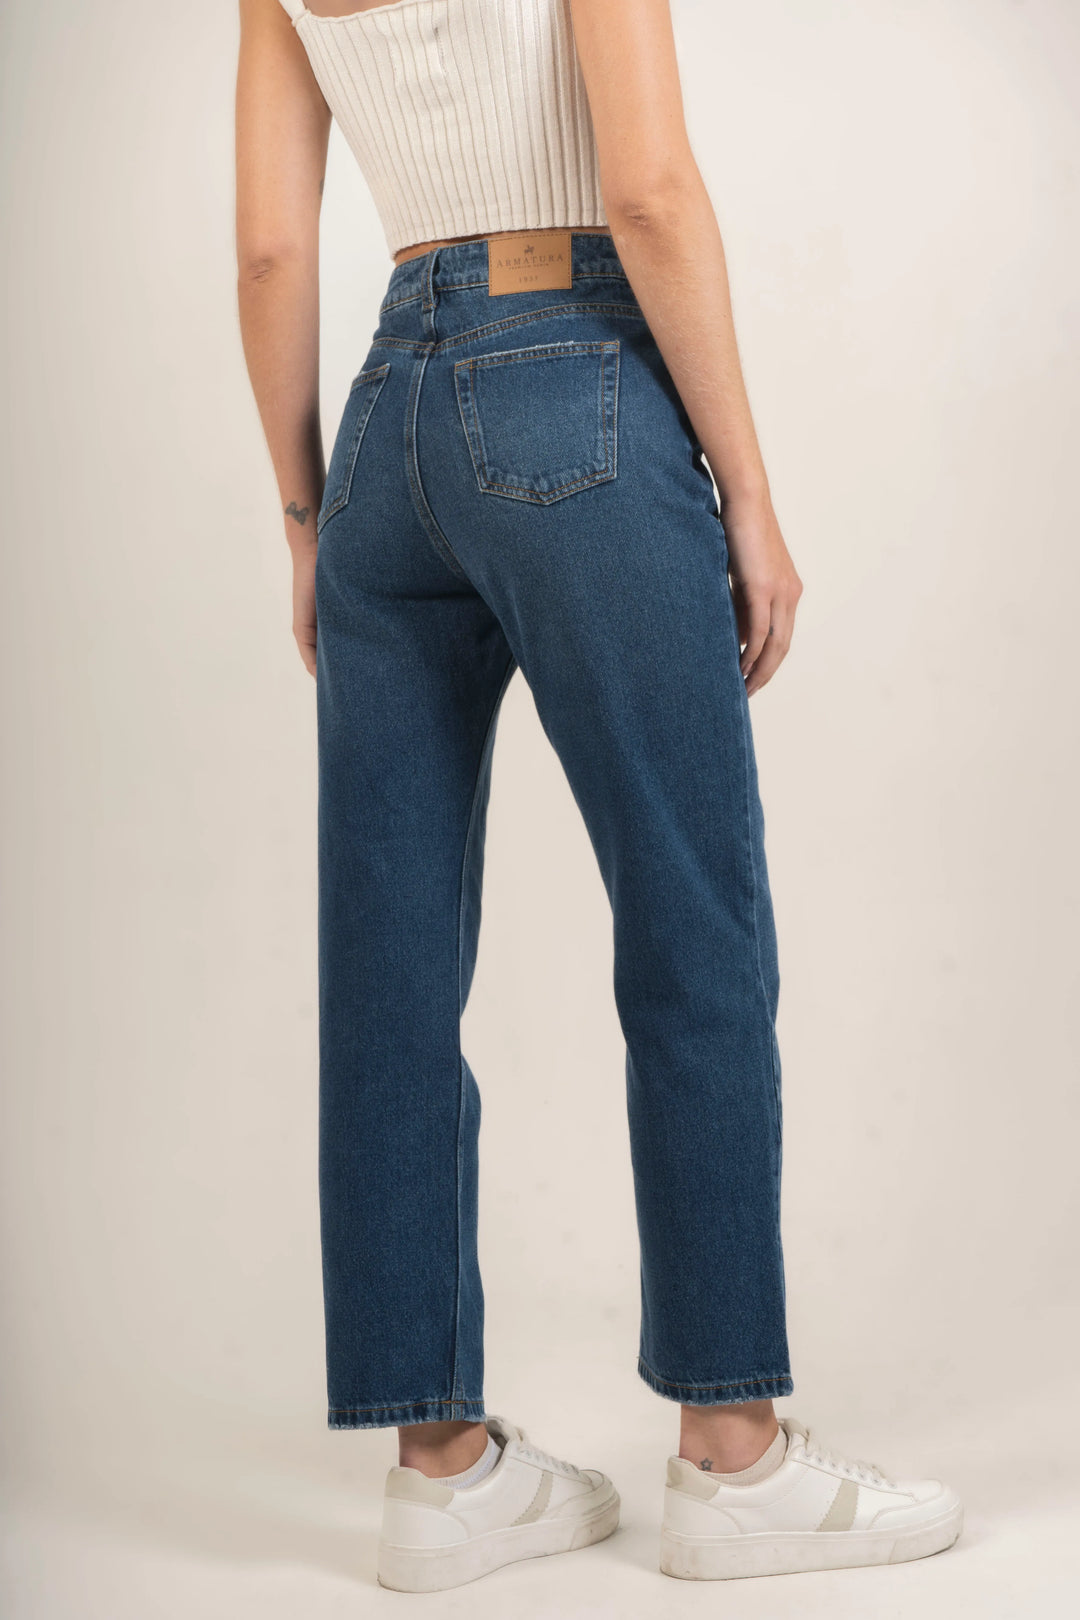 Straight Jeans Mujer Azul Oscuro